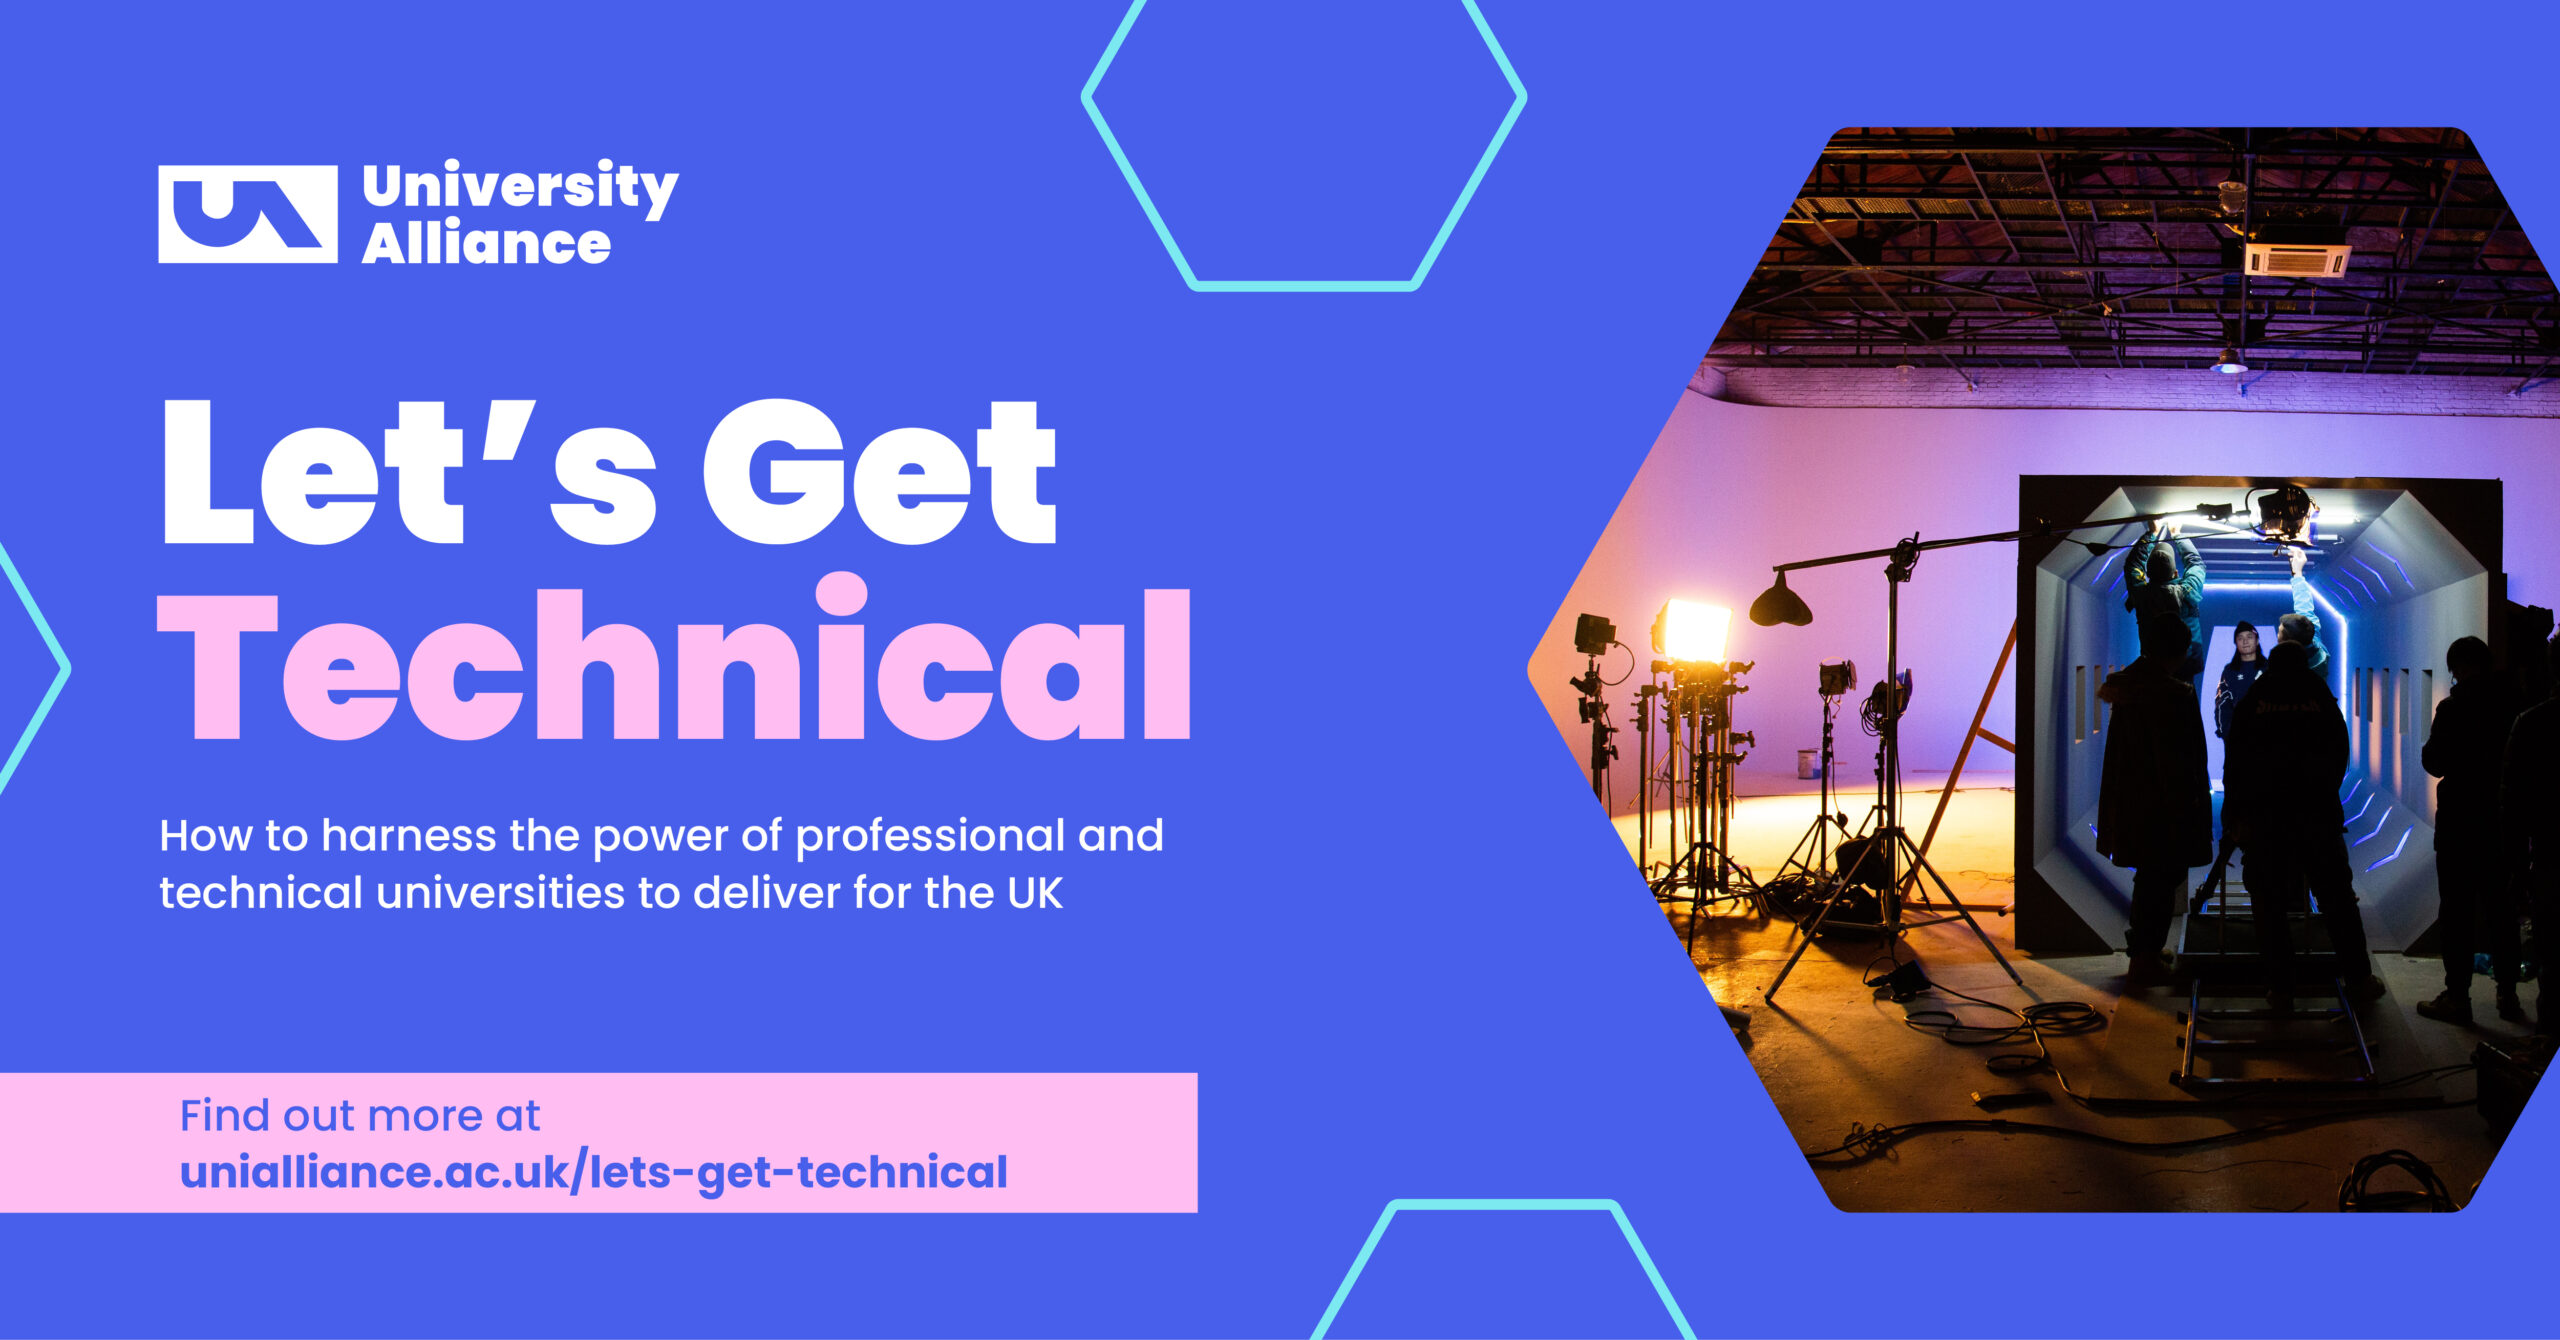 A banner for University Alliance's 'Let's Get technical' campaign